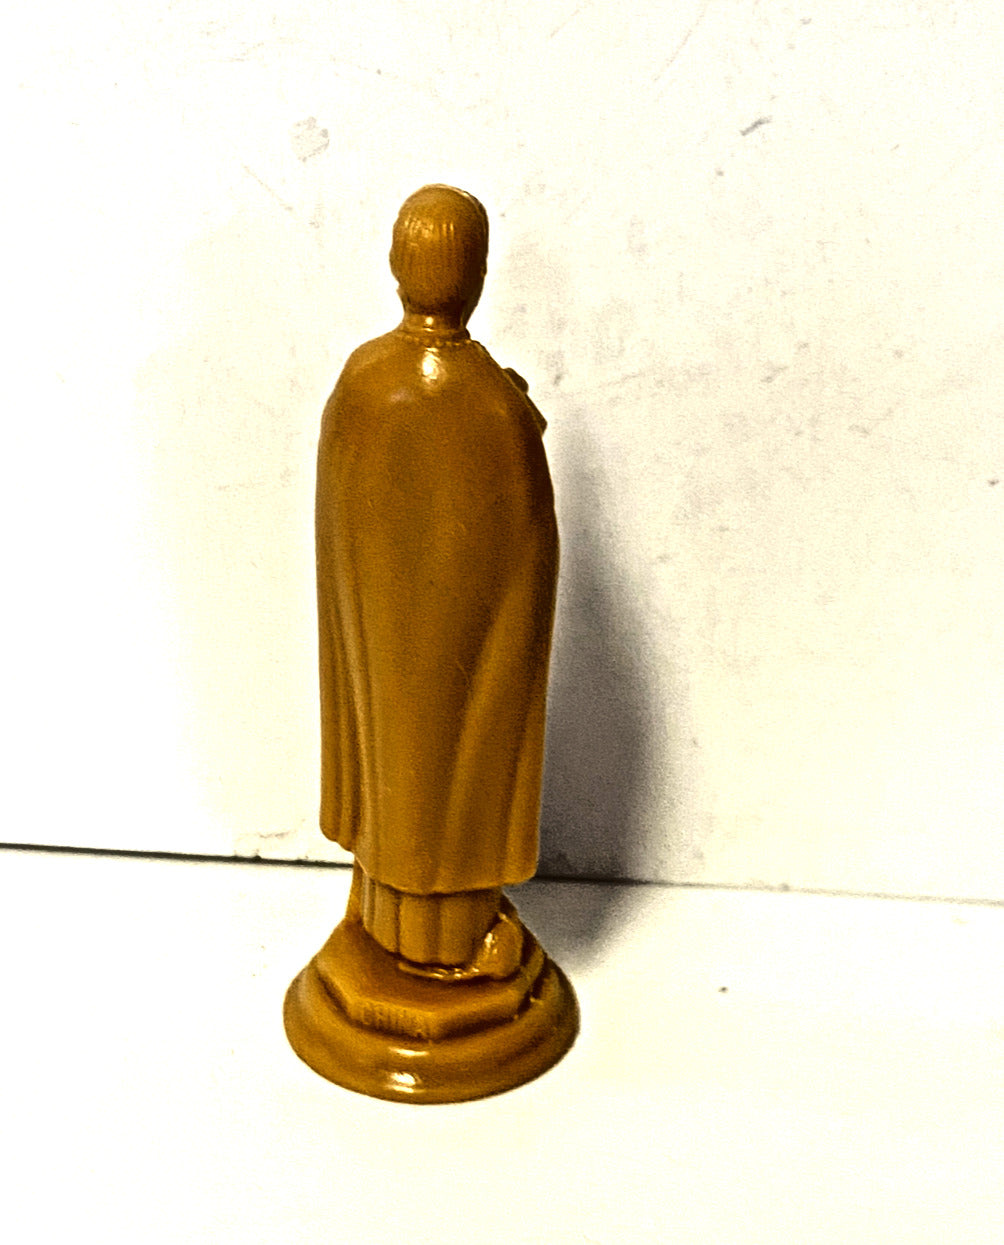 Saint Martin de Porres Very Small 2.50" H Statue, New - Bob and Penny Lord